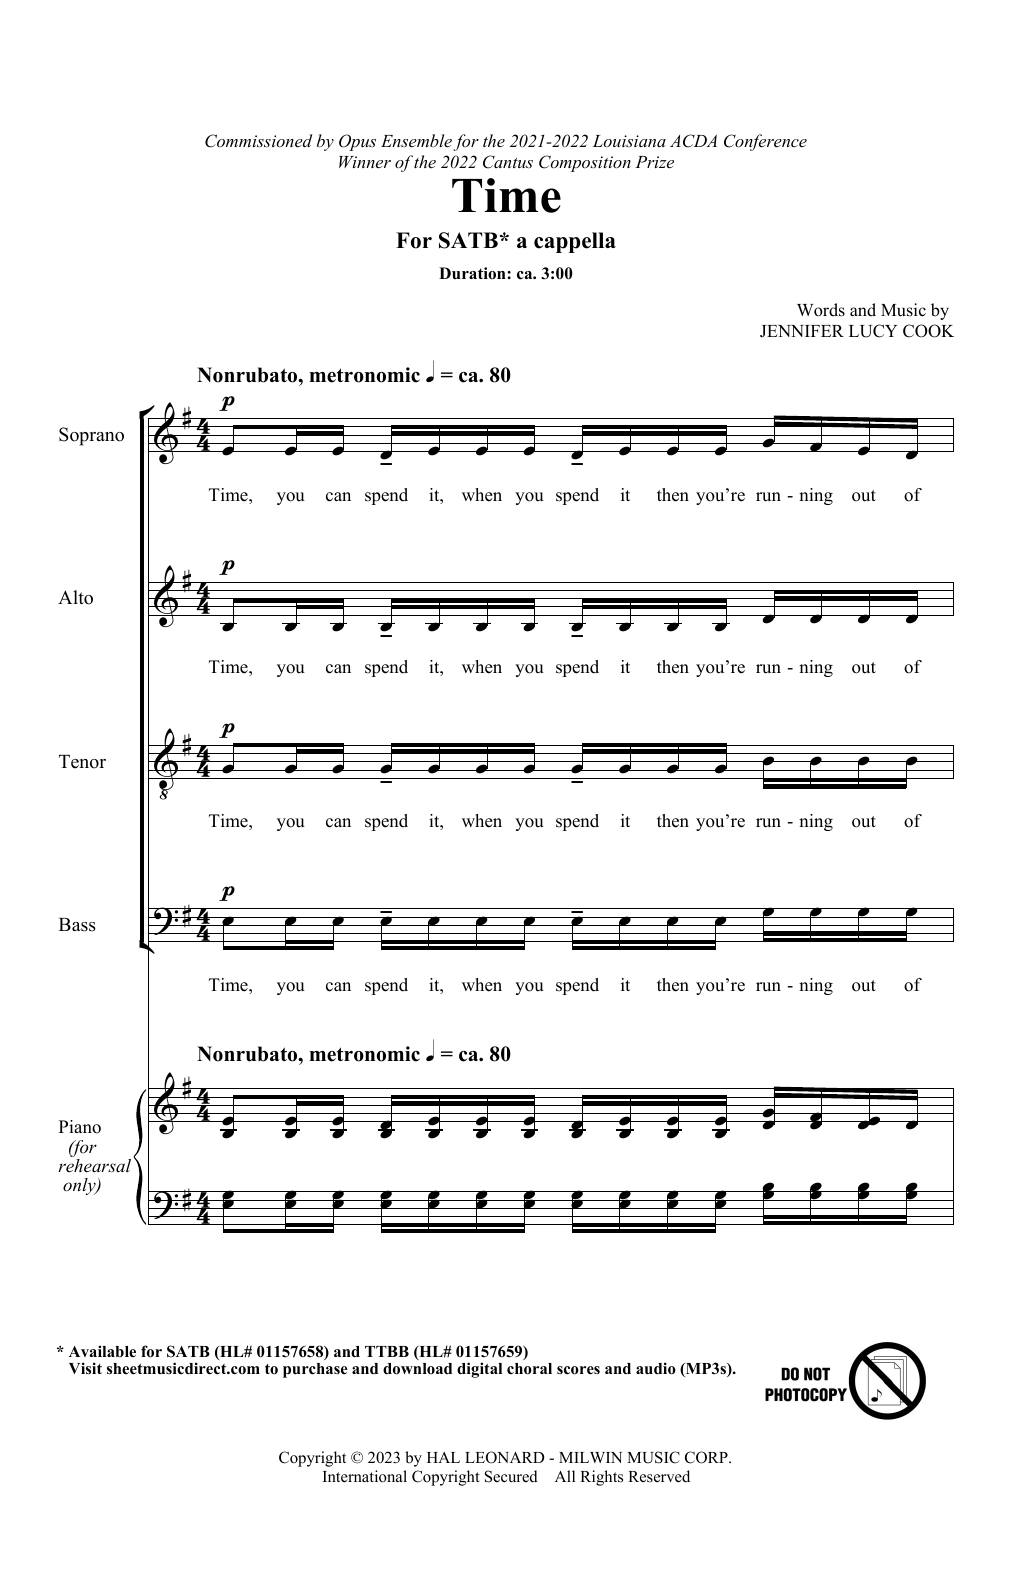 Download Jennifer Lucy Cook Time Sheet Music